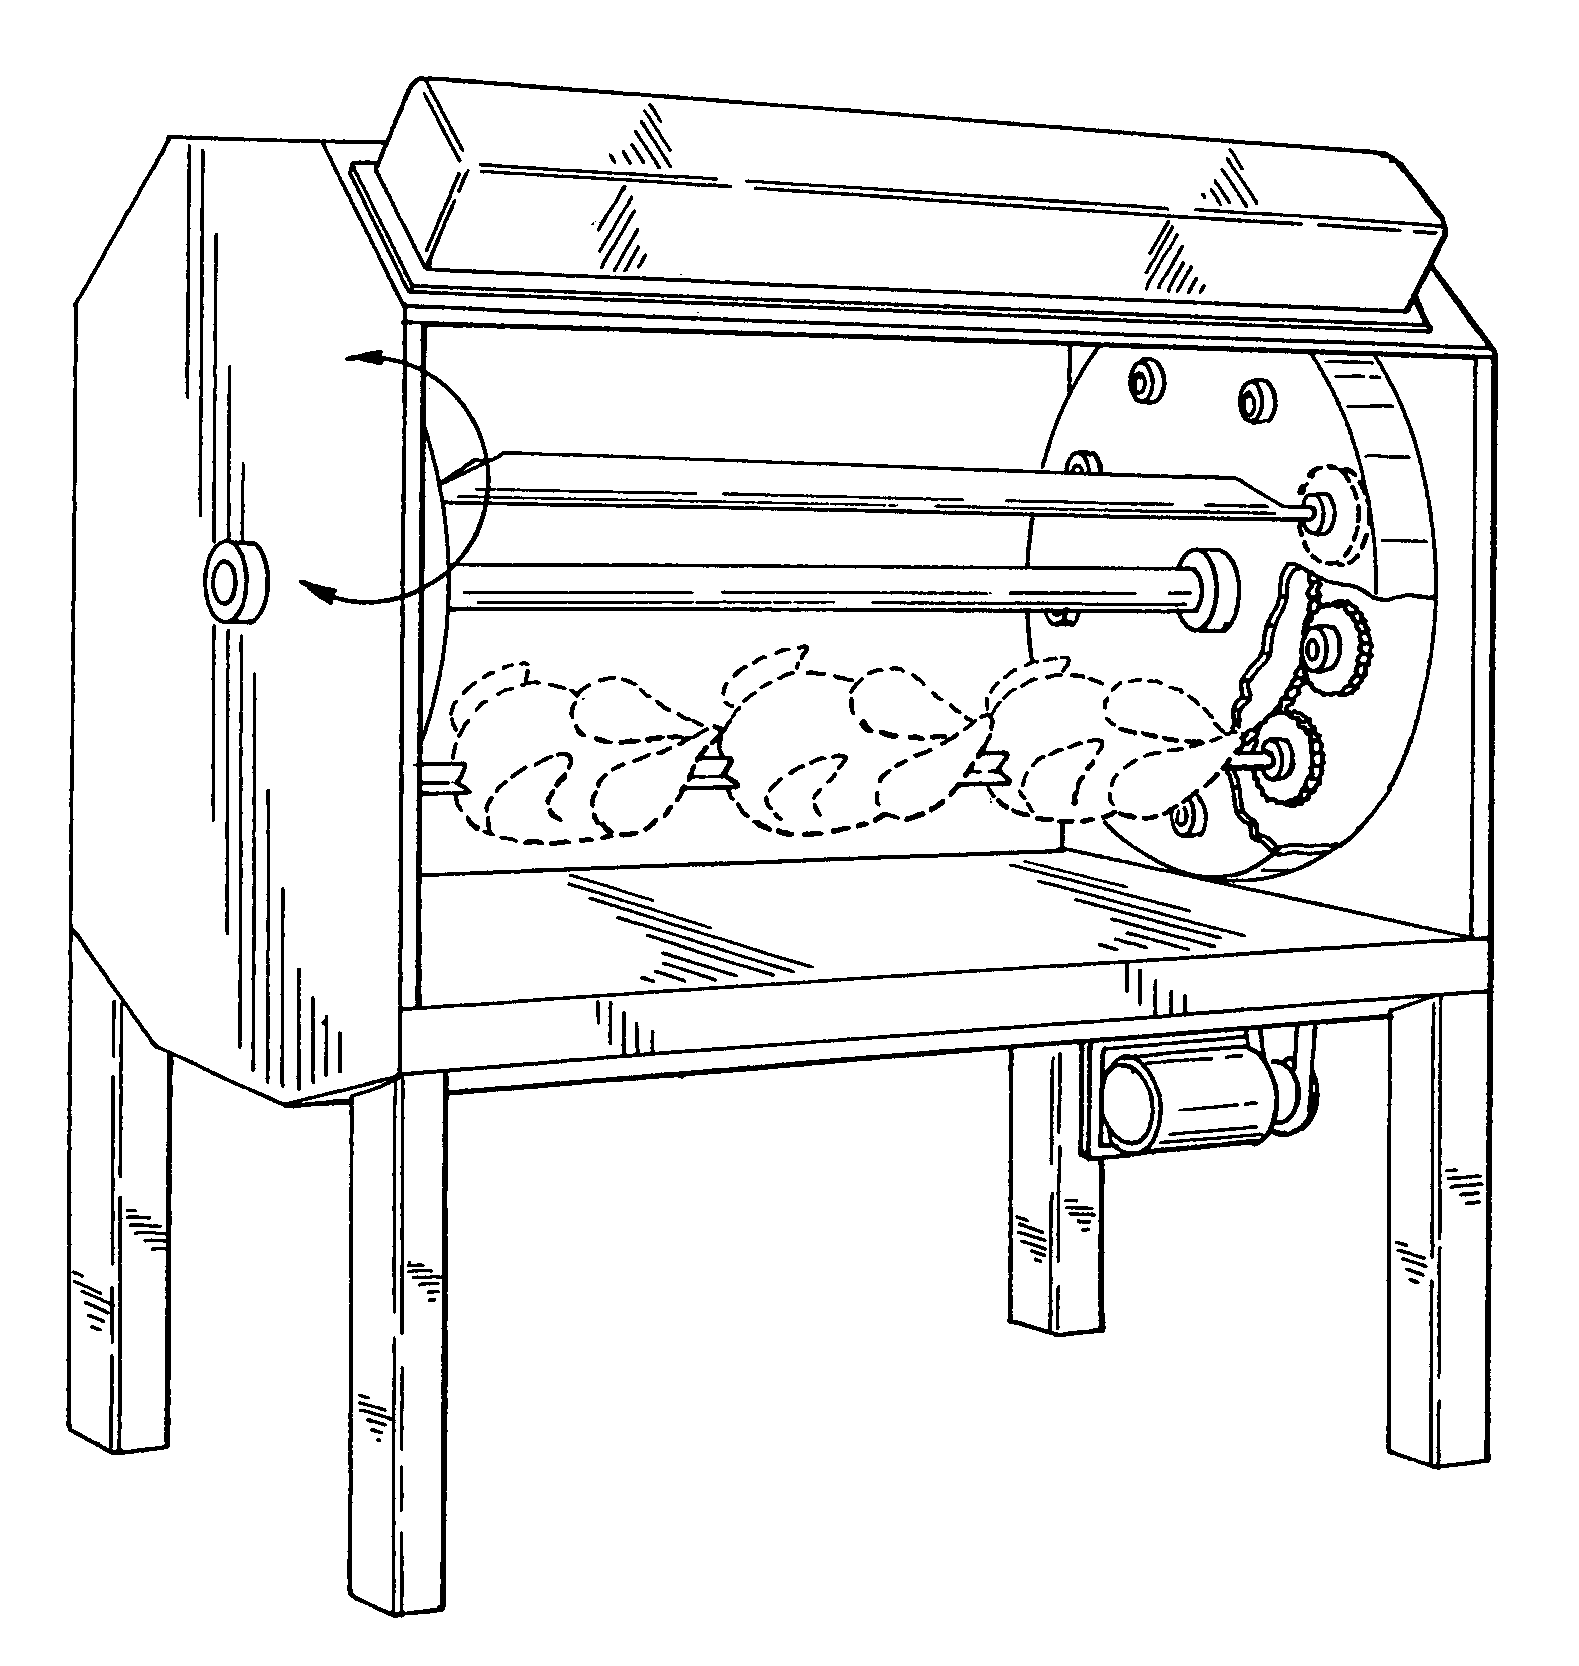 Cooking apparatus and method therefor